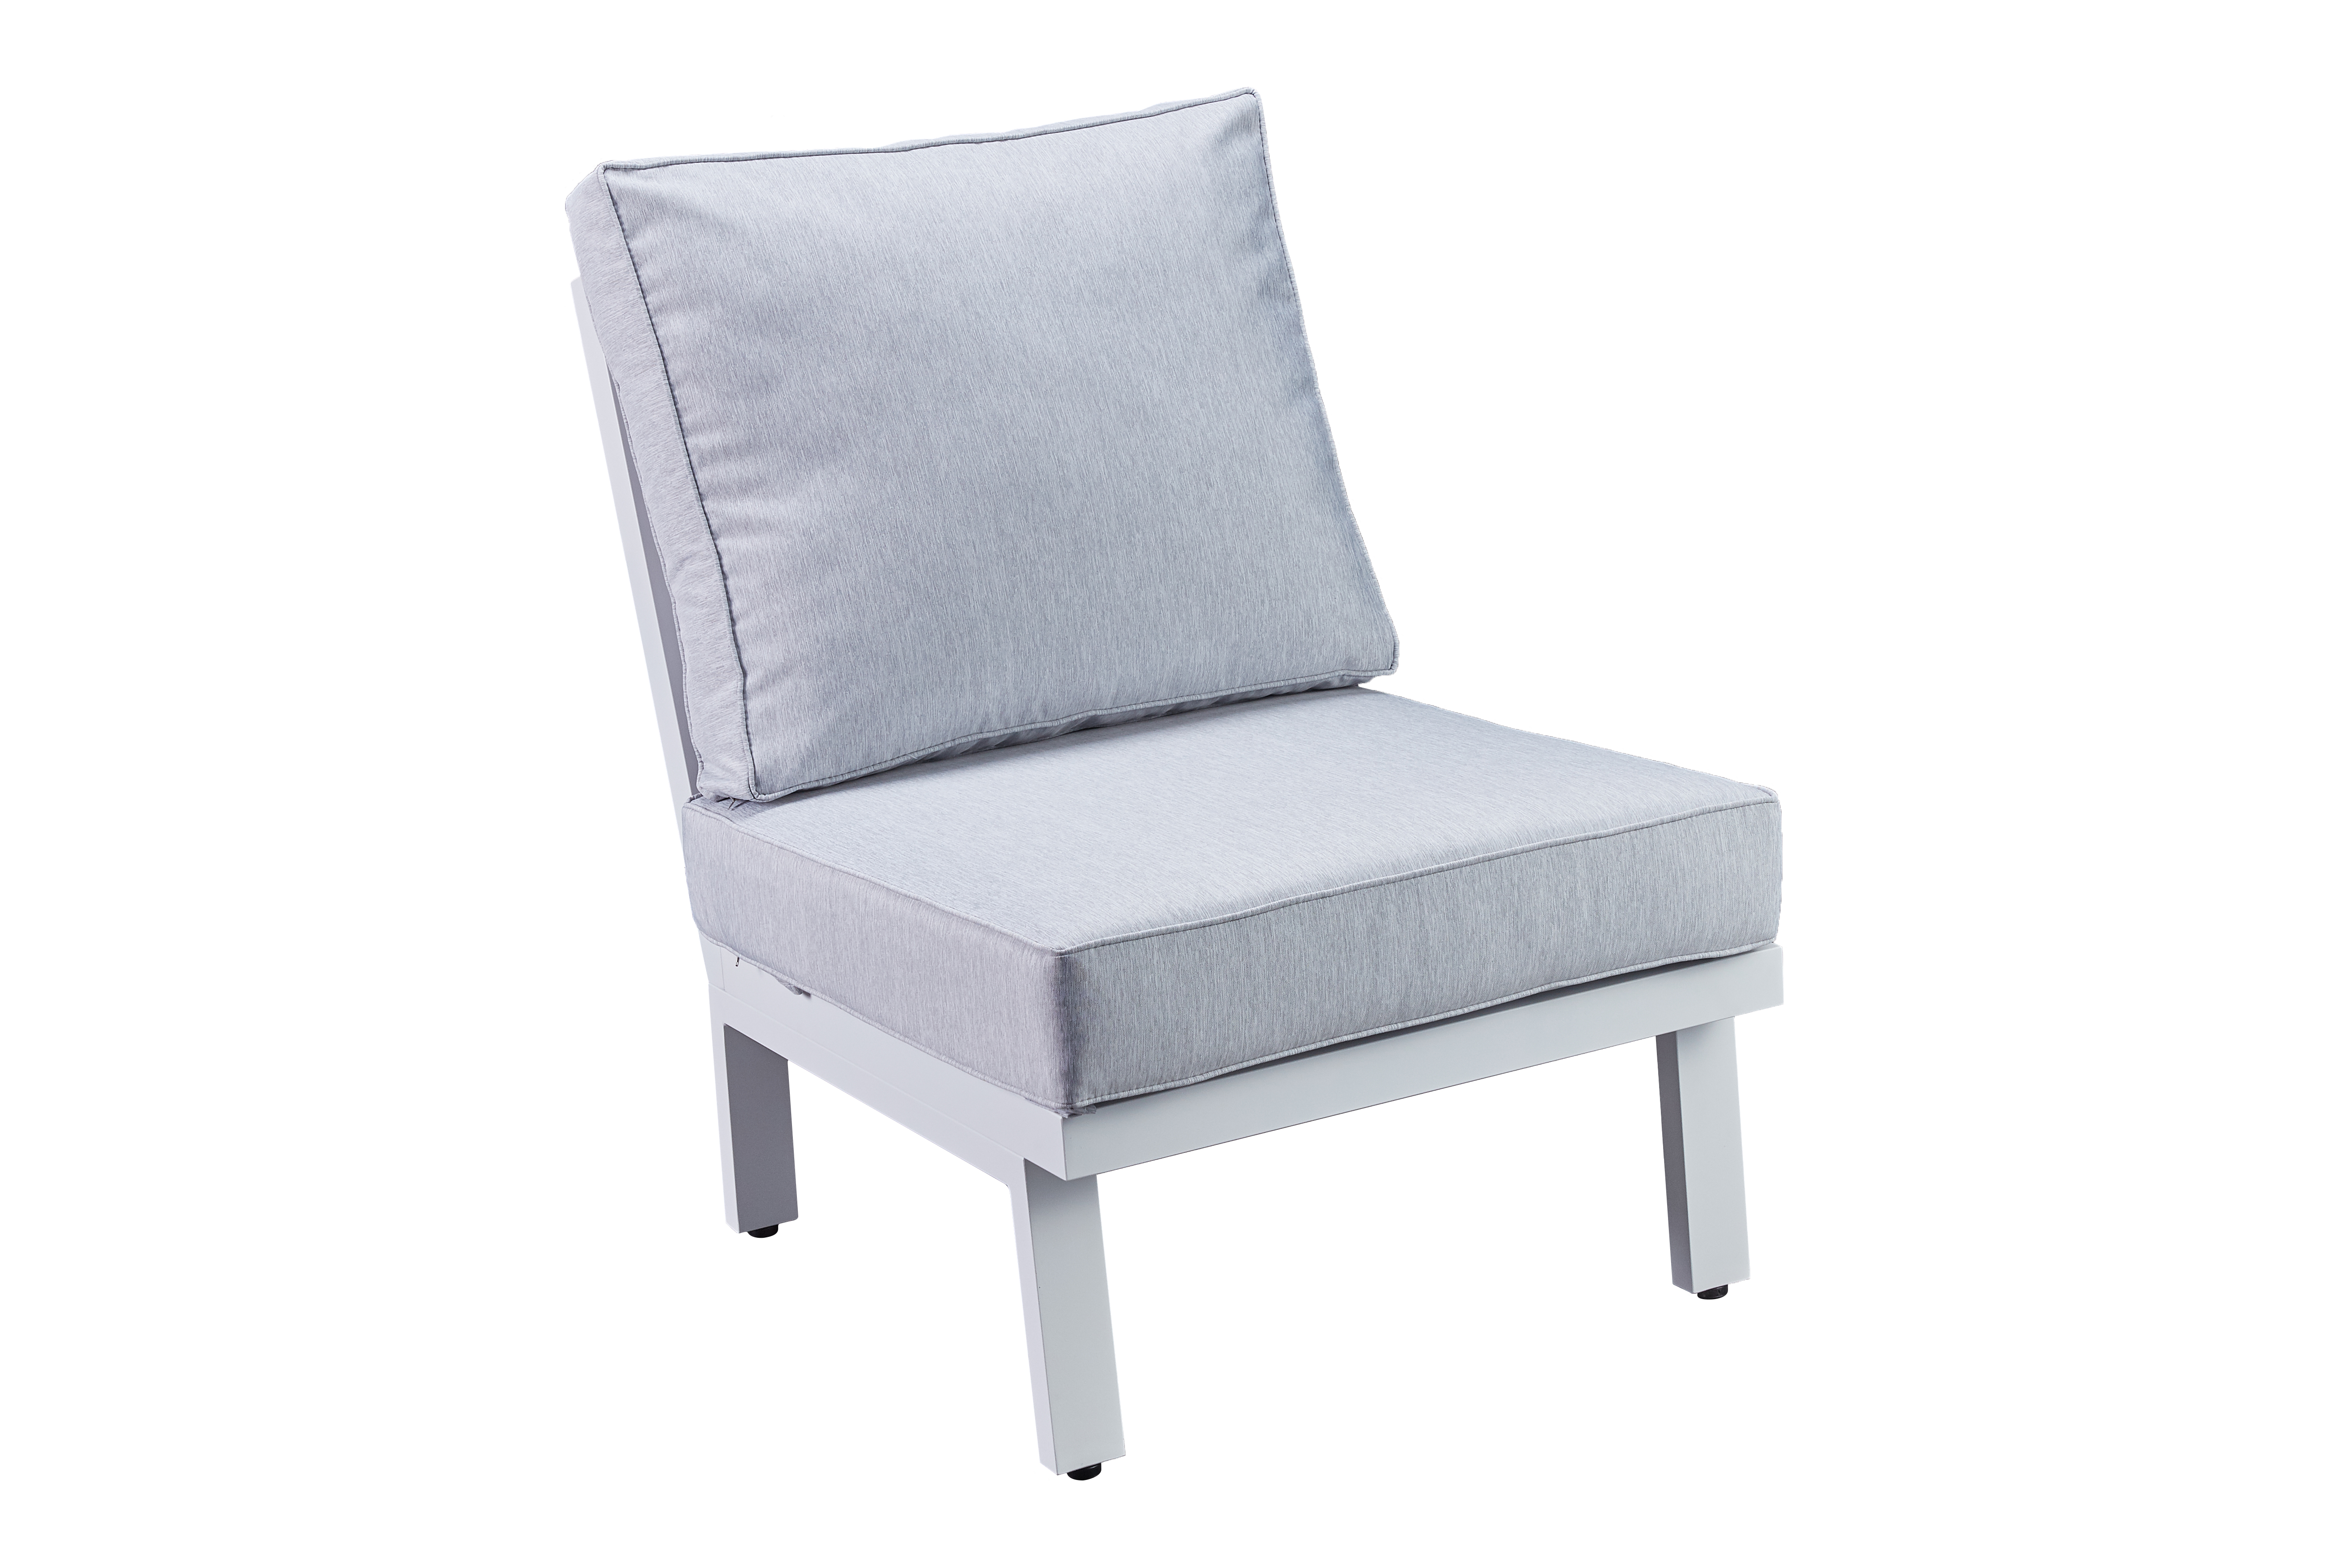 Cheapest armless single seat Wholesale Price